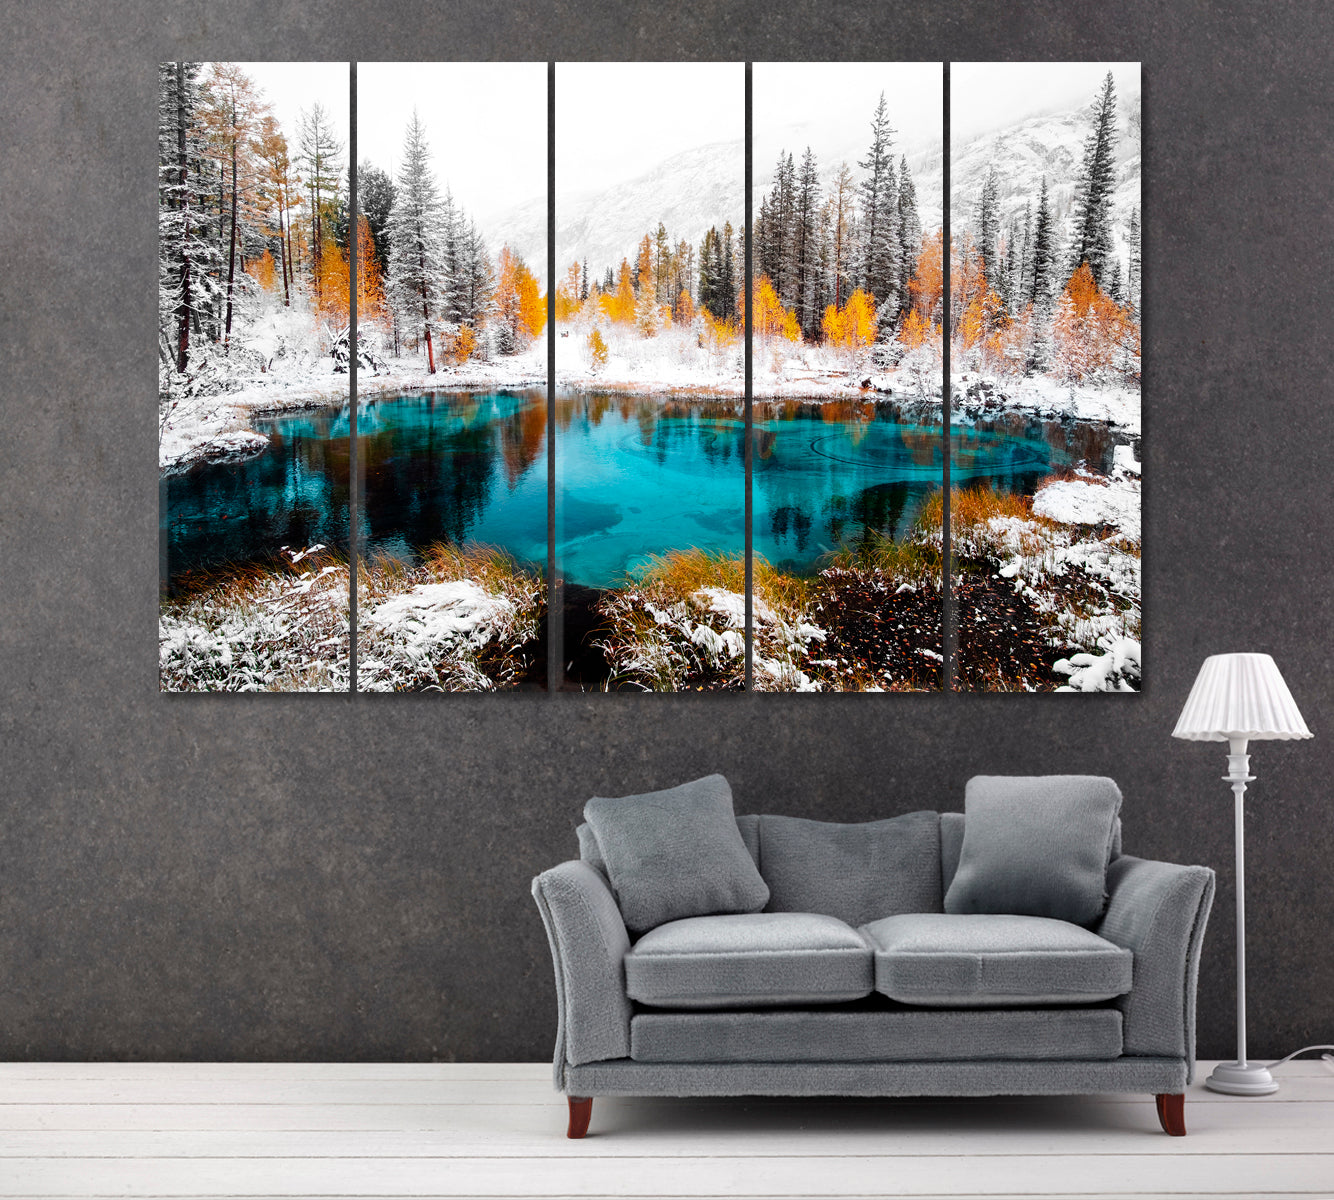 Blue Geyser Lake in Winter Forest Altai Russia Canvas Print ArtLexy 5 Panels 36"x24" inches 